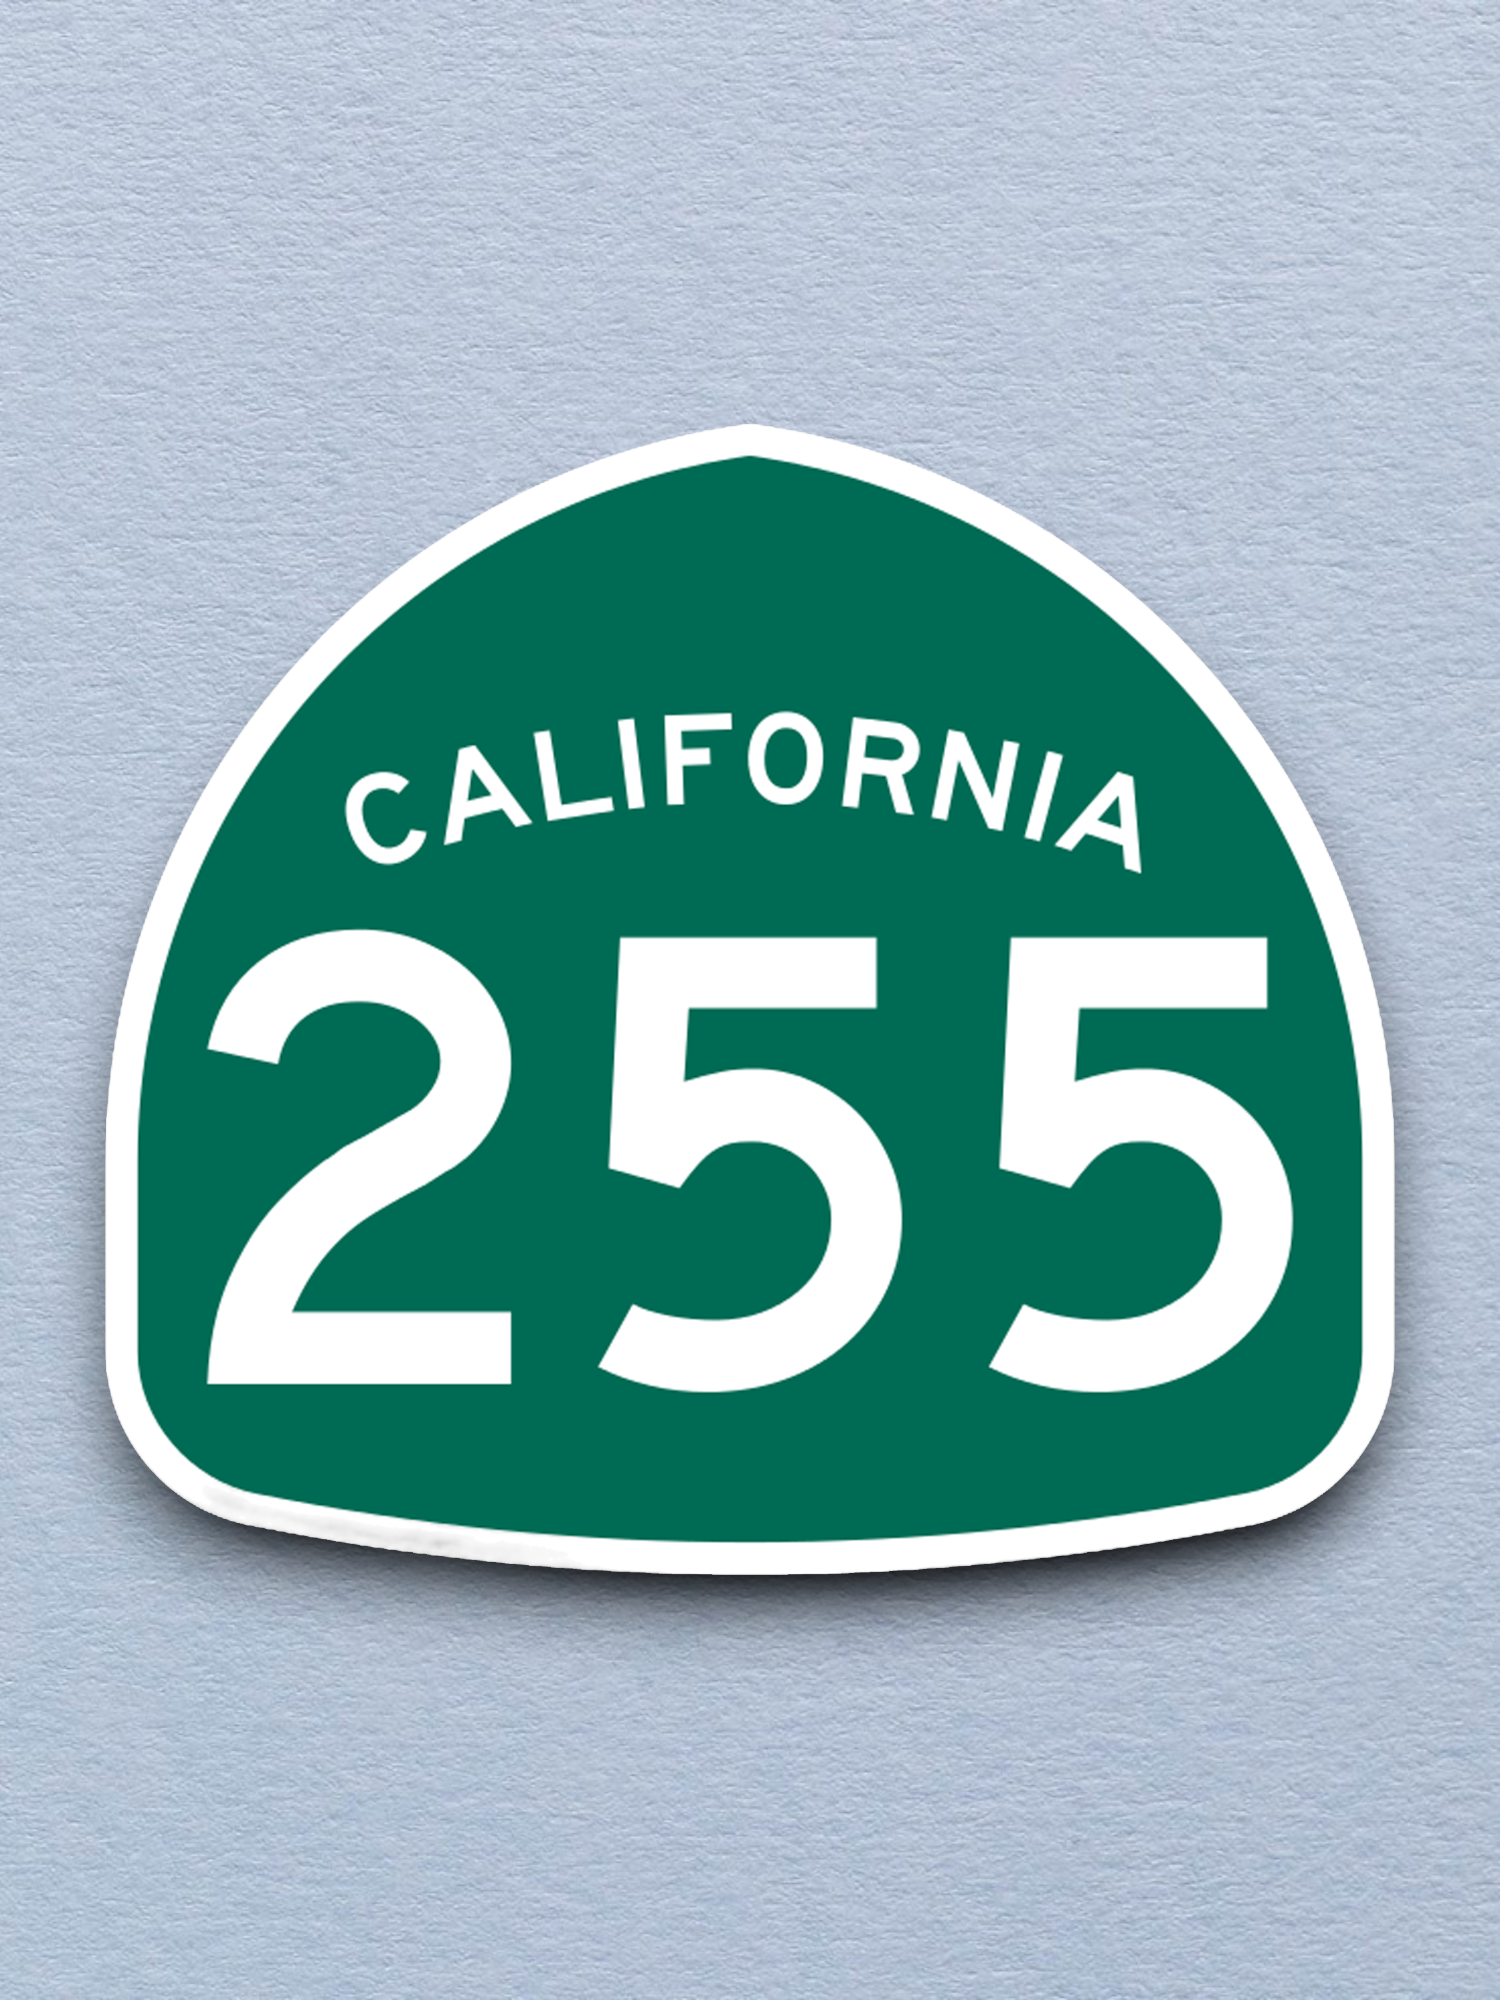 California State Route 255 Road Sign Sticker